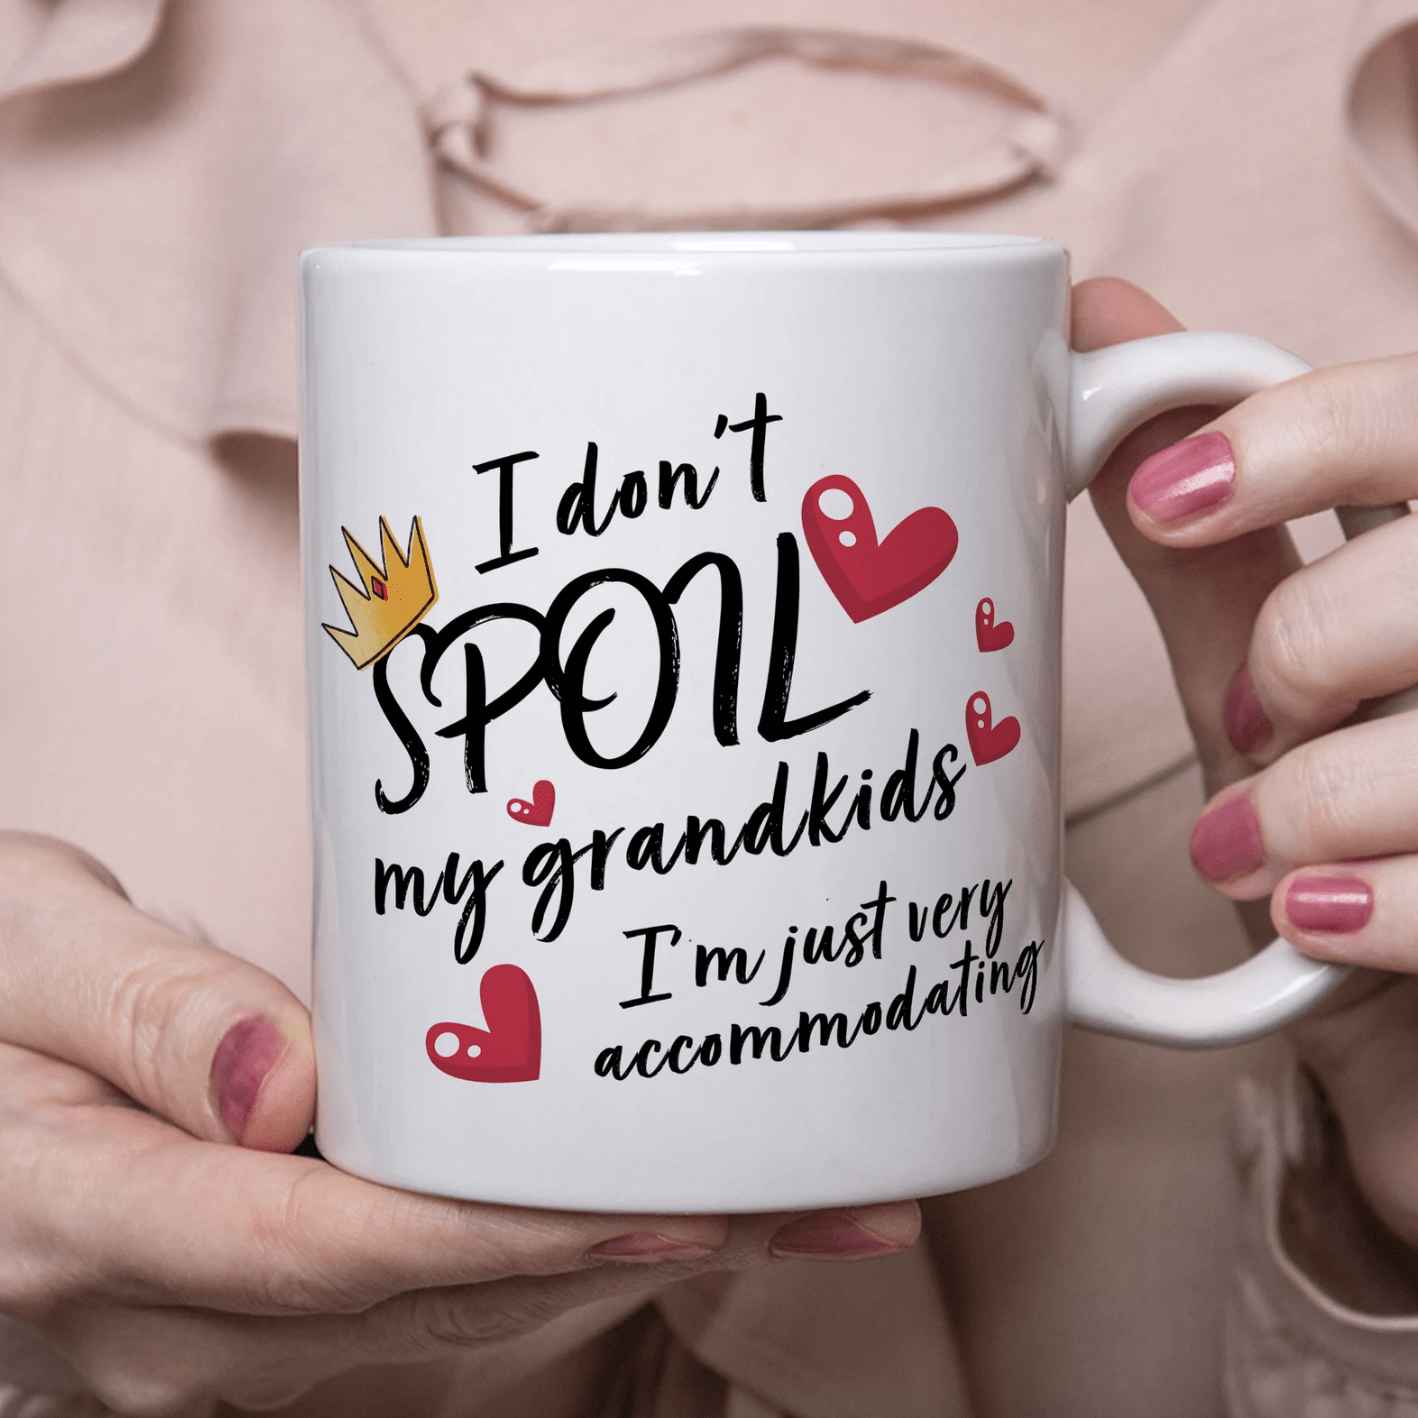 27+ Good Gifts for Grandma on Mother's Day That Make Her Day